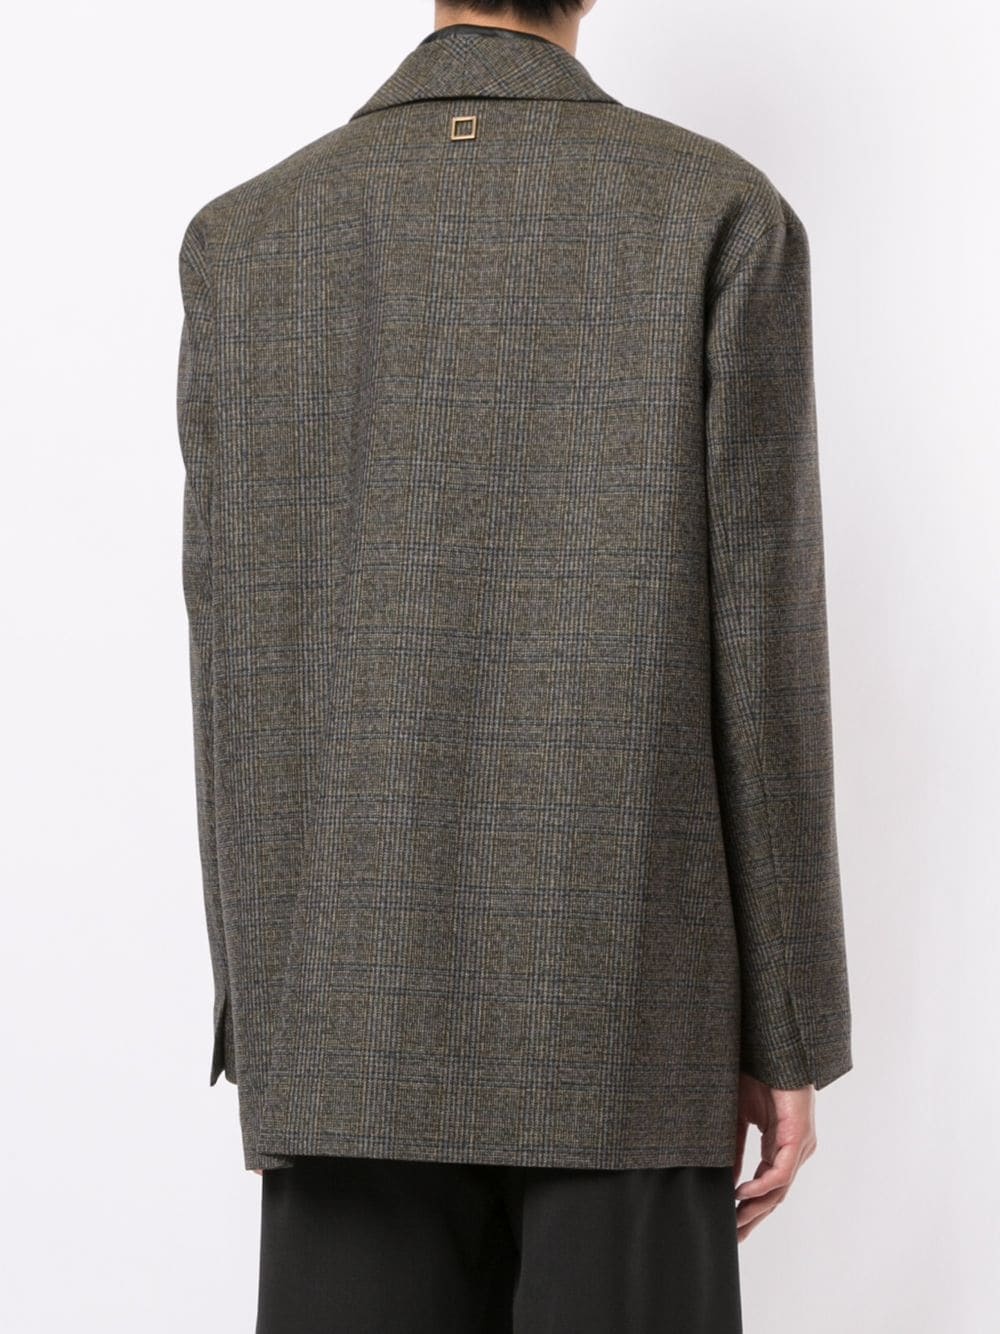 Wooyoungmi Double Breasted Shawl Collar Jacket, $1,216 | farfetch.com ...